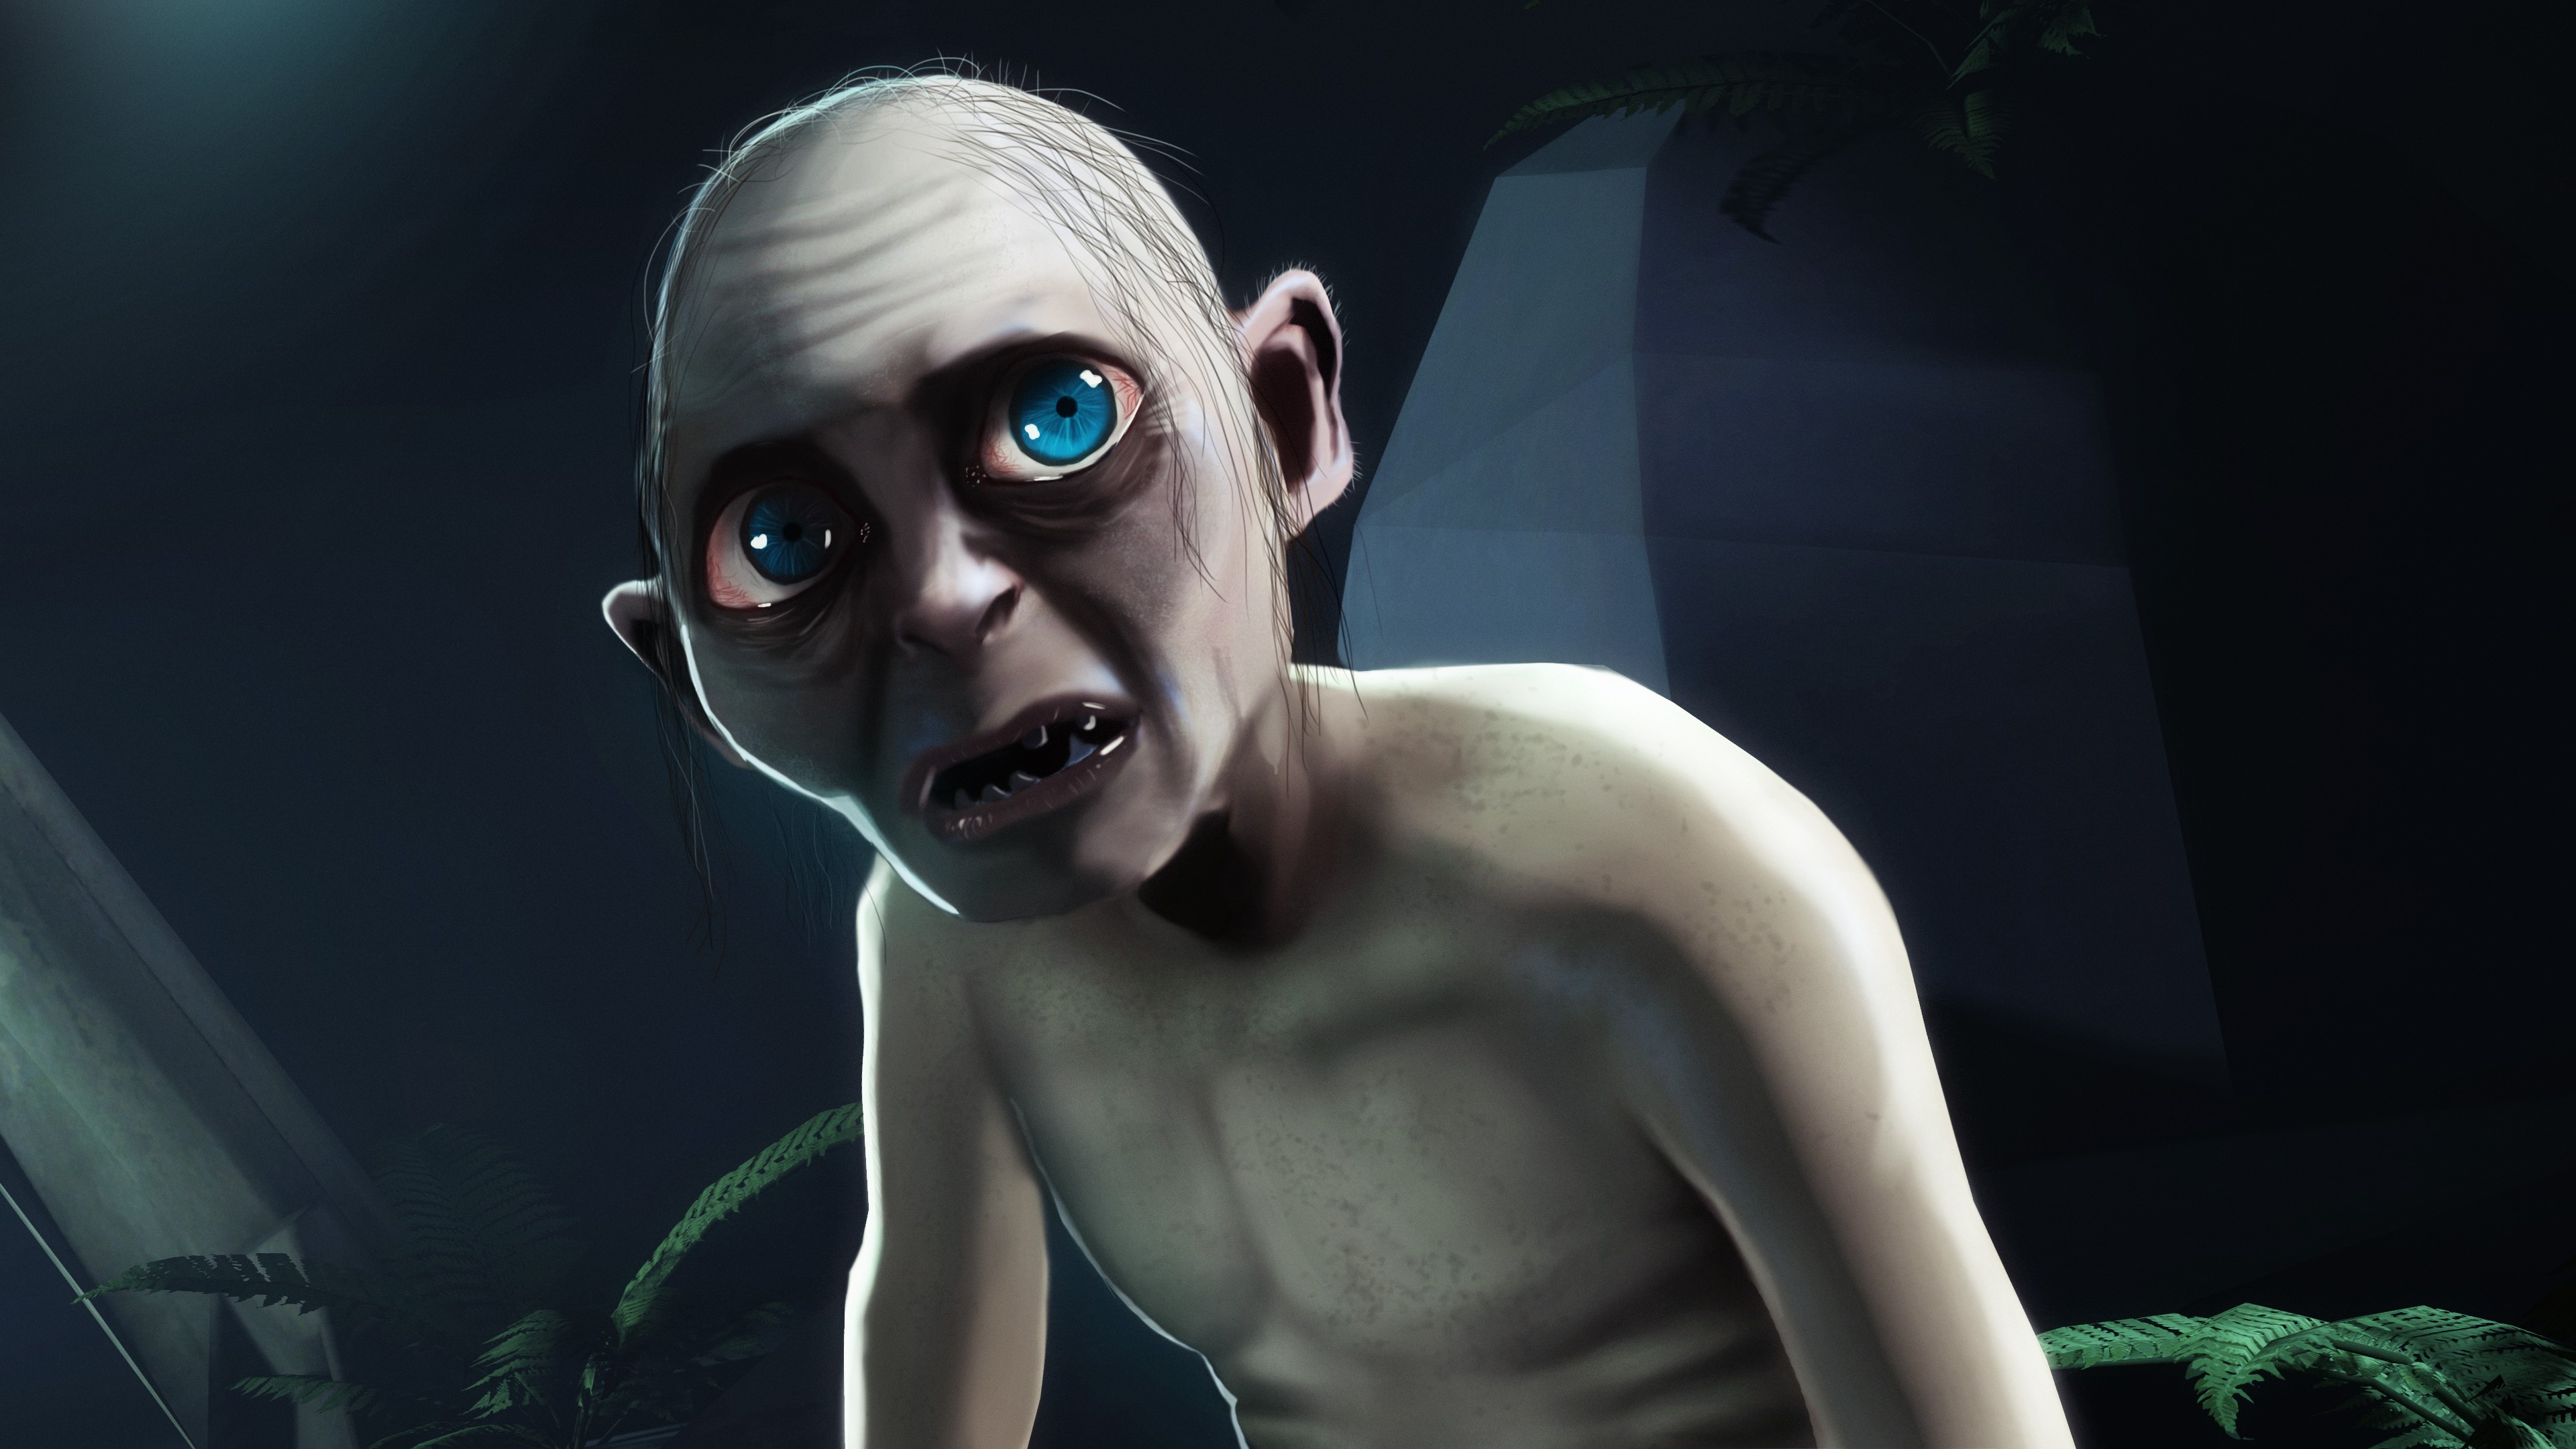 K gollum the lord of the rings glance